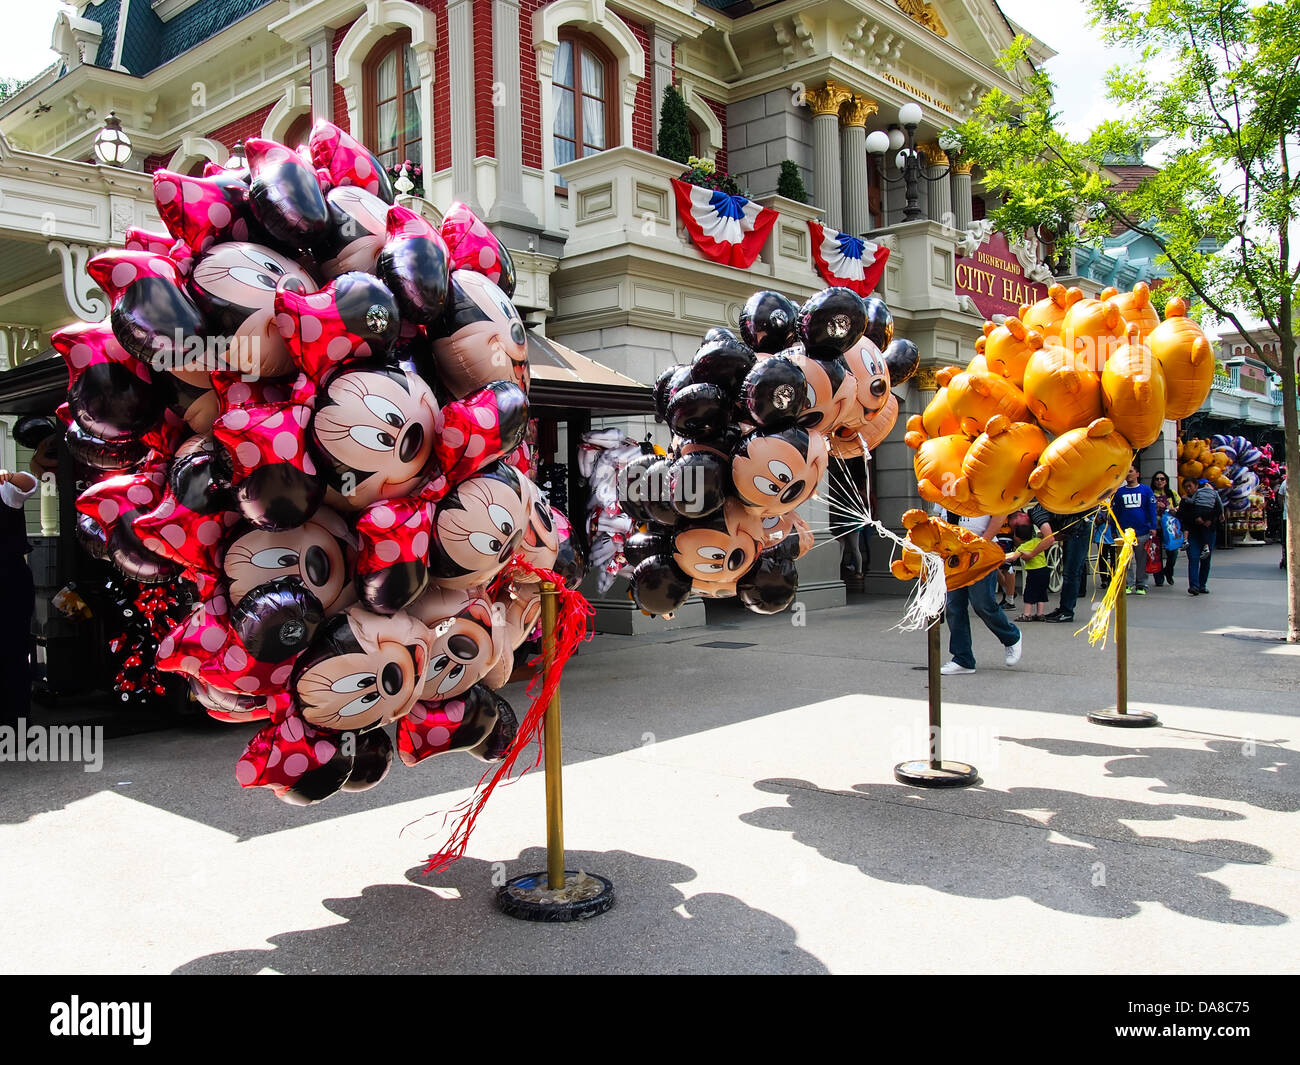 Mickey Mouse, Minnie mouse and Winnie the Pooh helium balloons on sale on  Main street at Disneyland Paris Stock Photo - Alamy